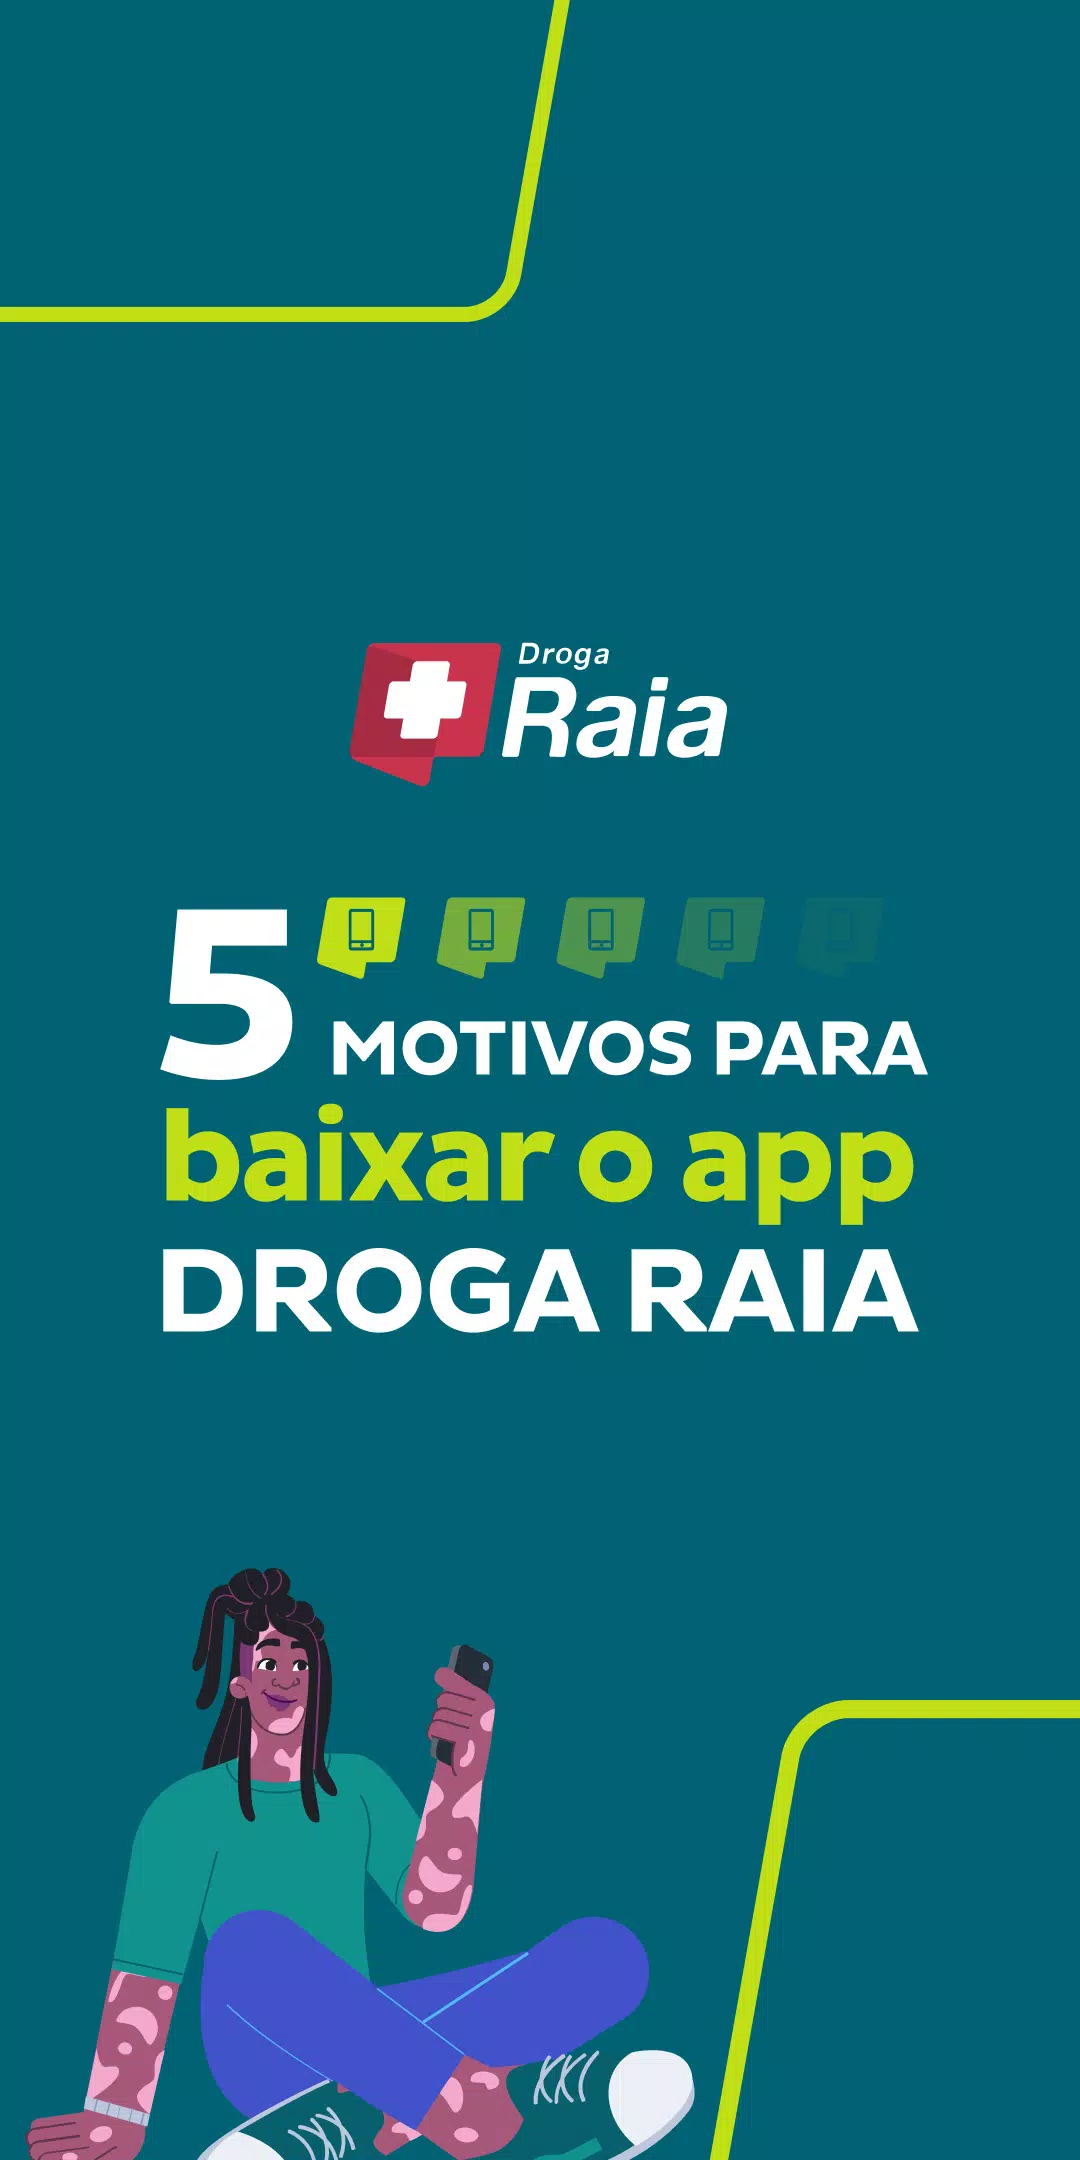 Drogasil: Drogaria Online 24h for Android - Download